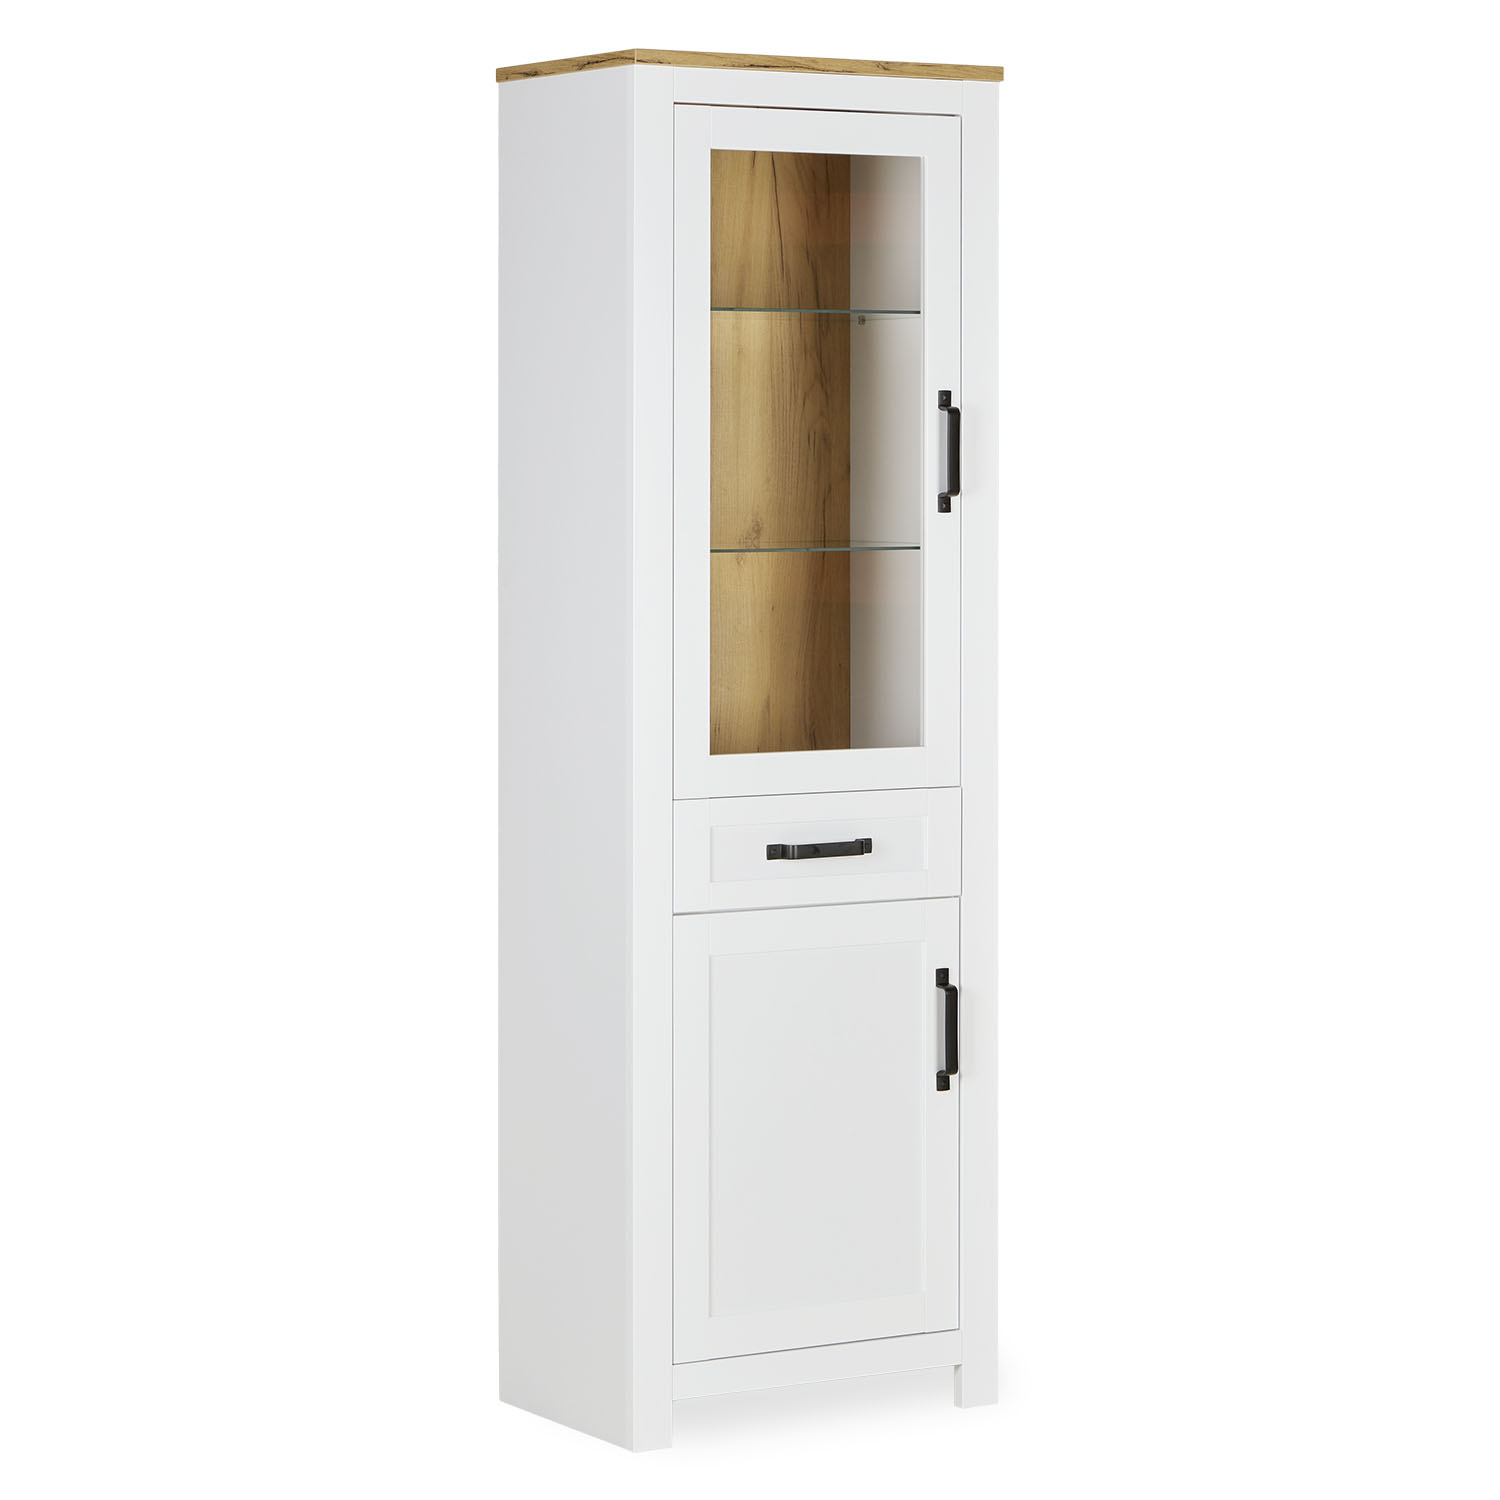 Showcase Highboard White Cabinet with compartments Living room cabinet Wood Oak Country Style